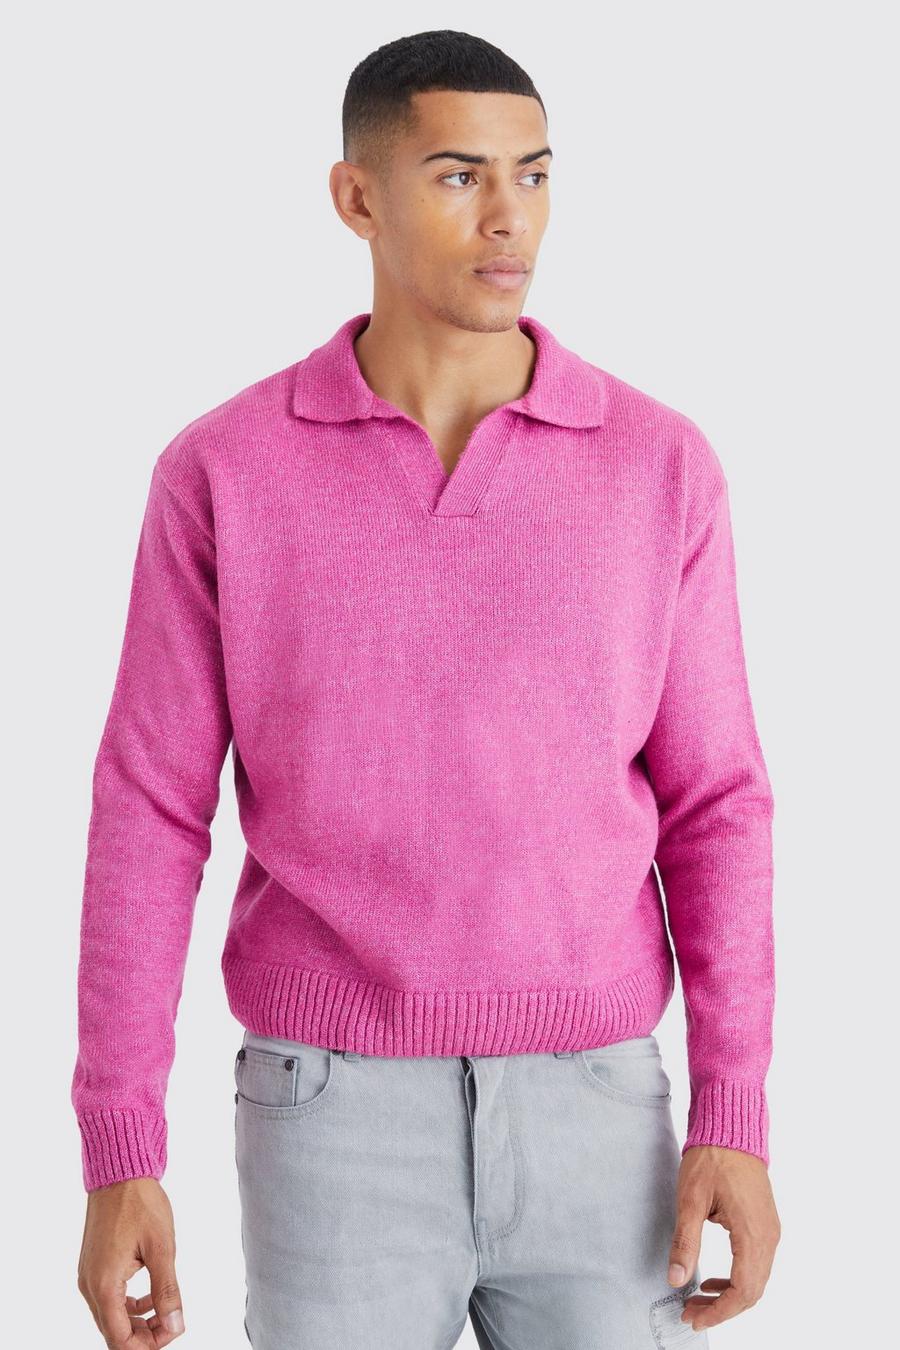 Hot pink rose Boxy Long Sleeve Knitted Revere Polo